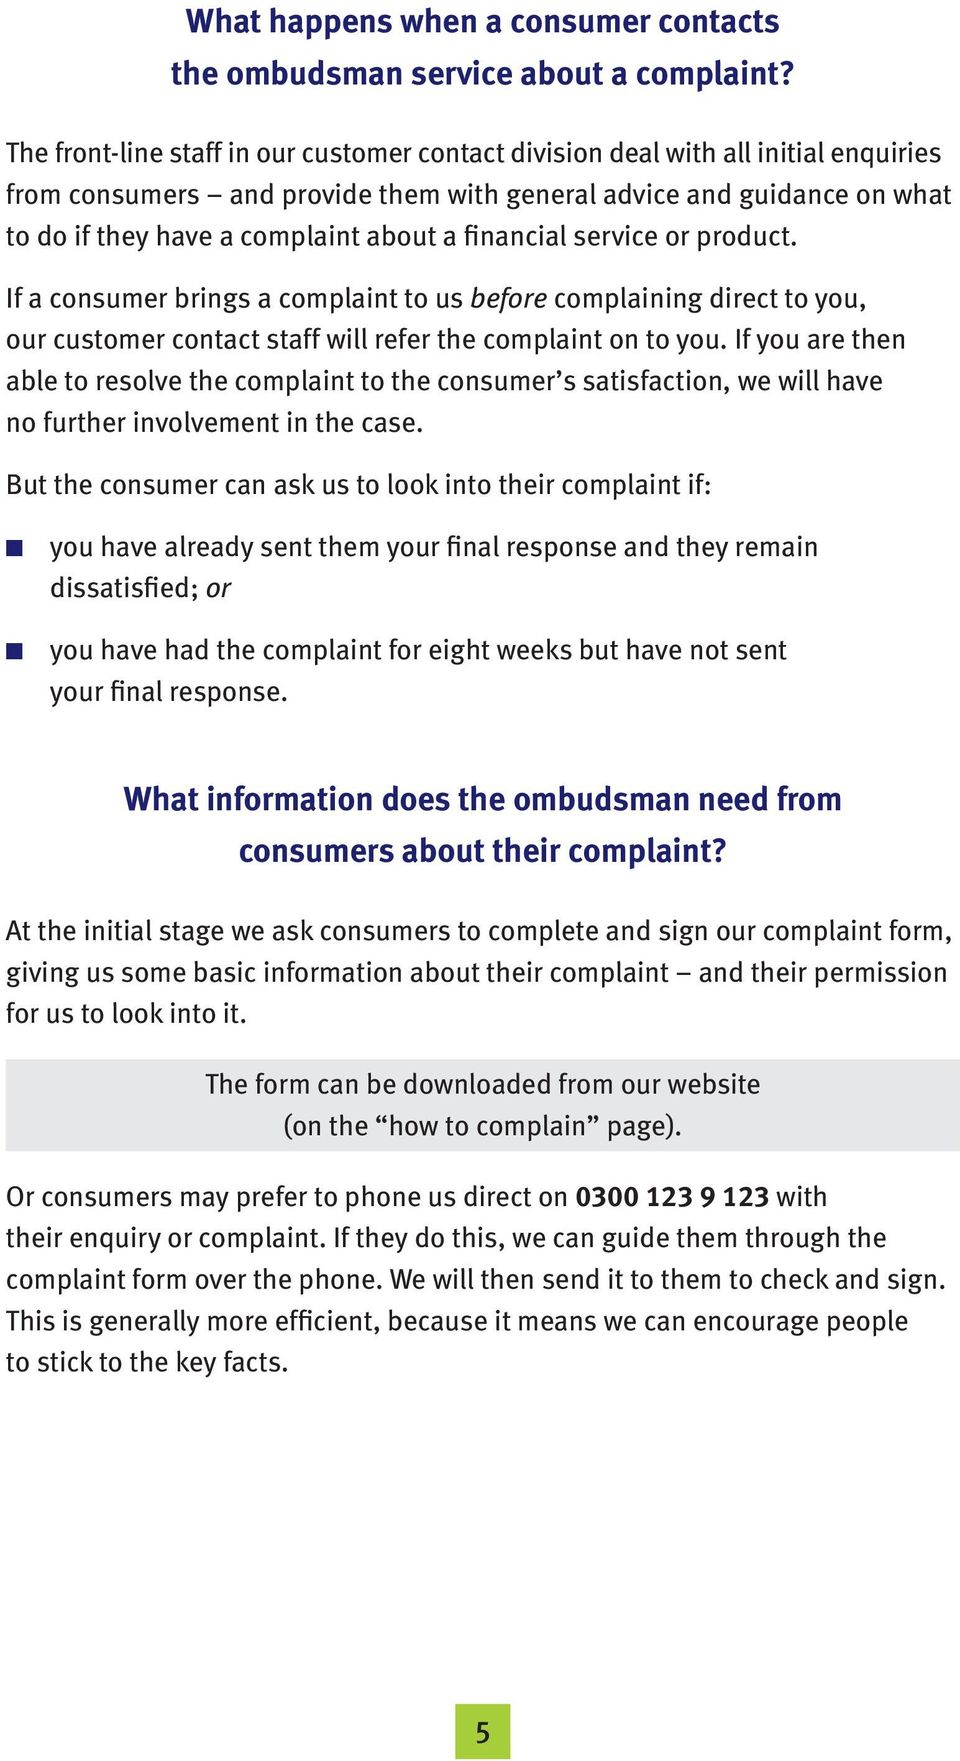 financial service or product. If a consumer brings a complaint to us before complaining direct to you, our customer contact staff will refer the complaint on to you.